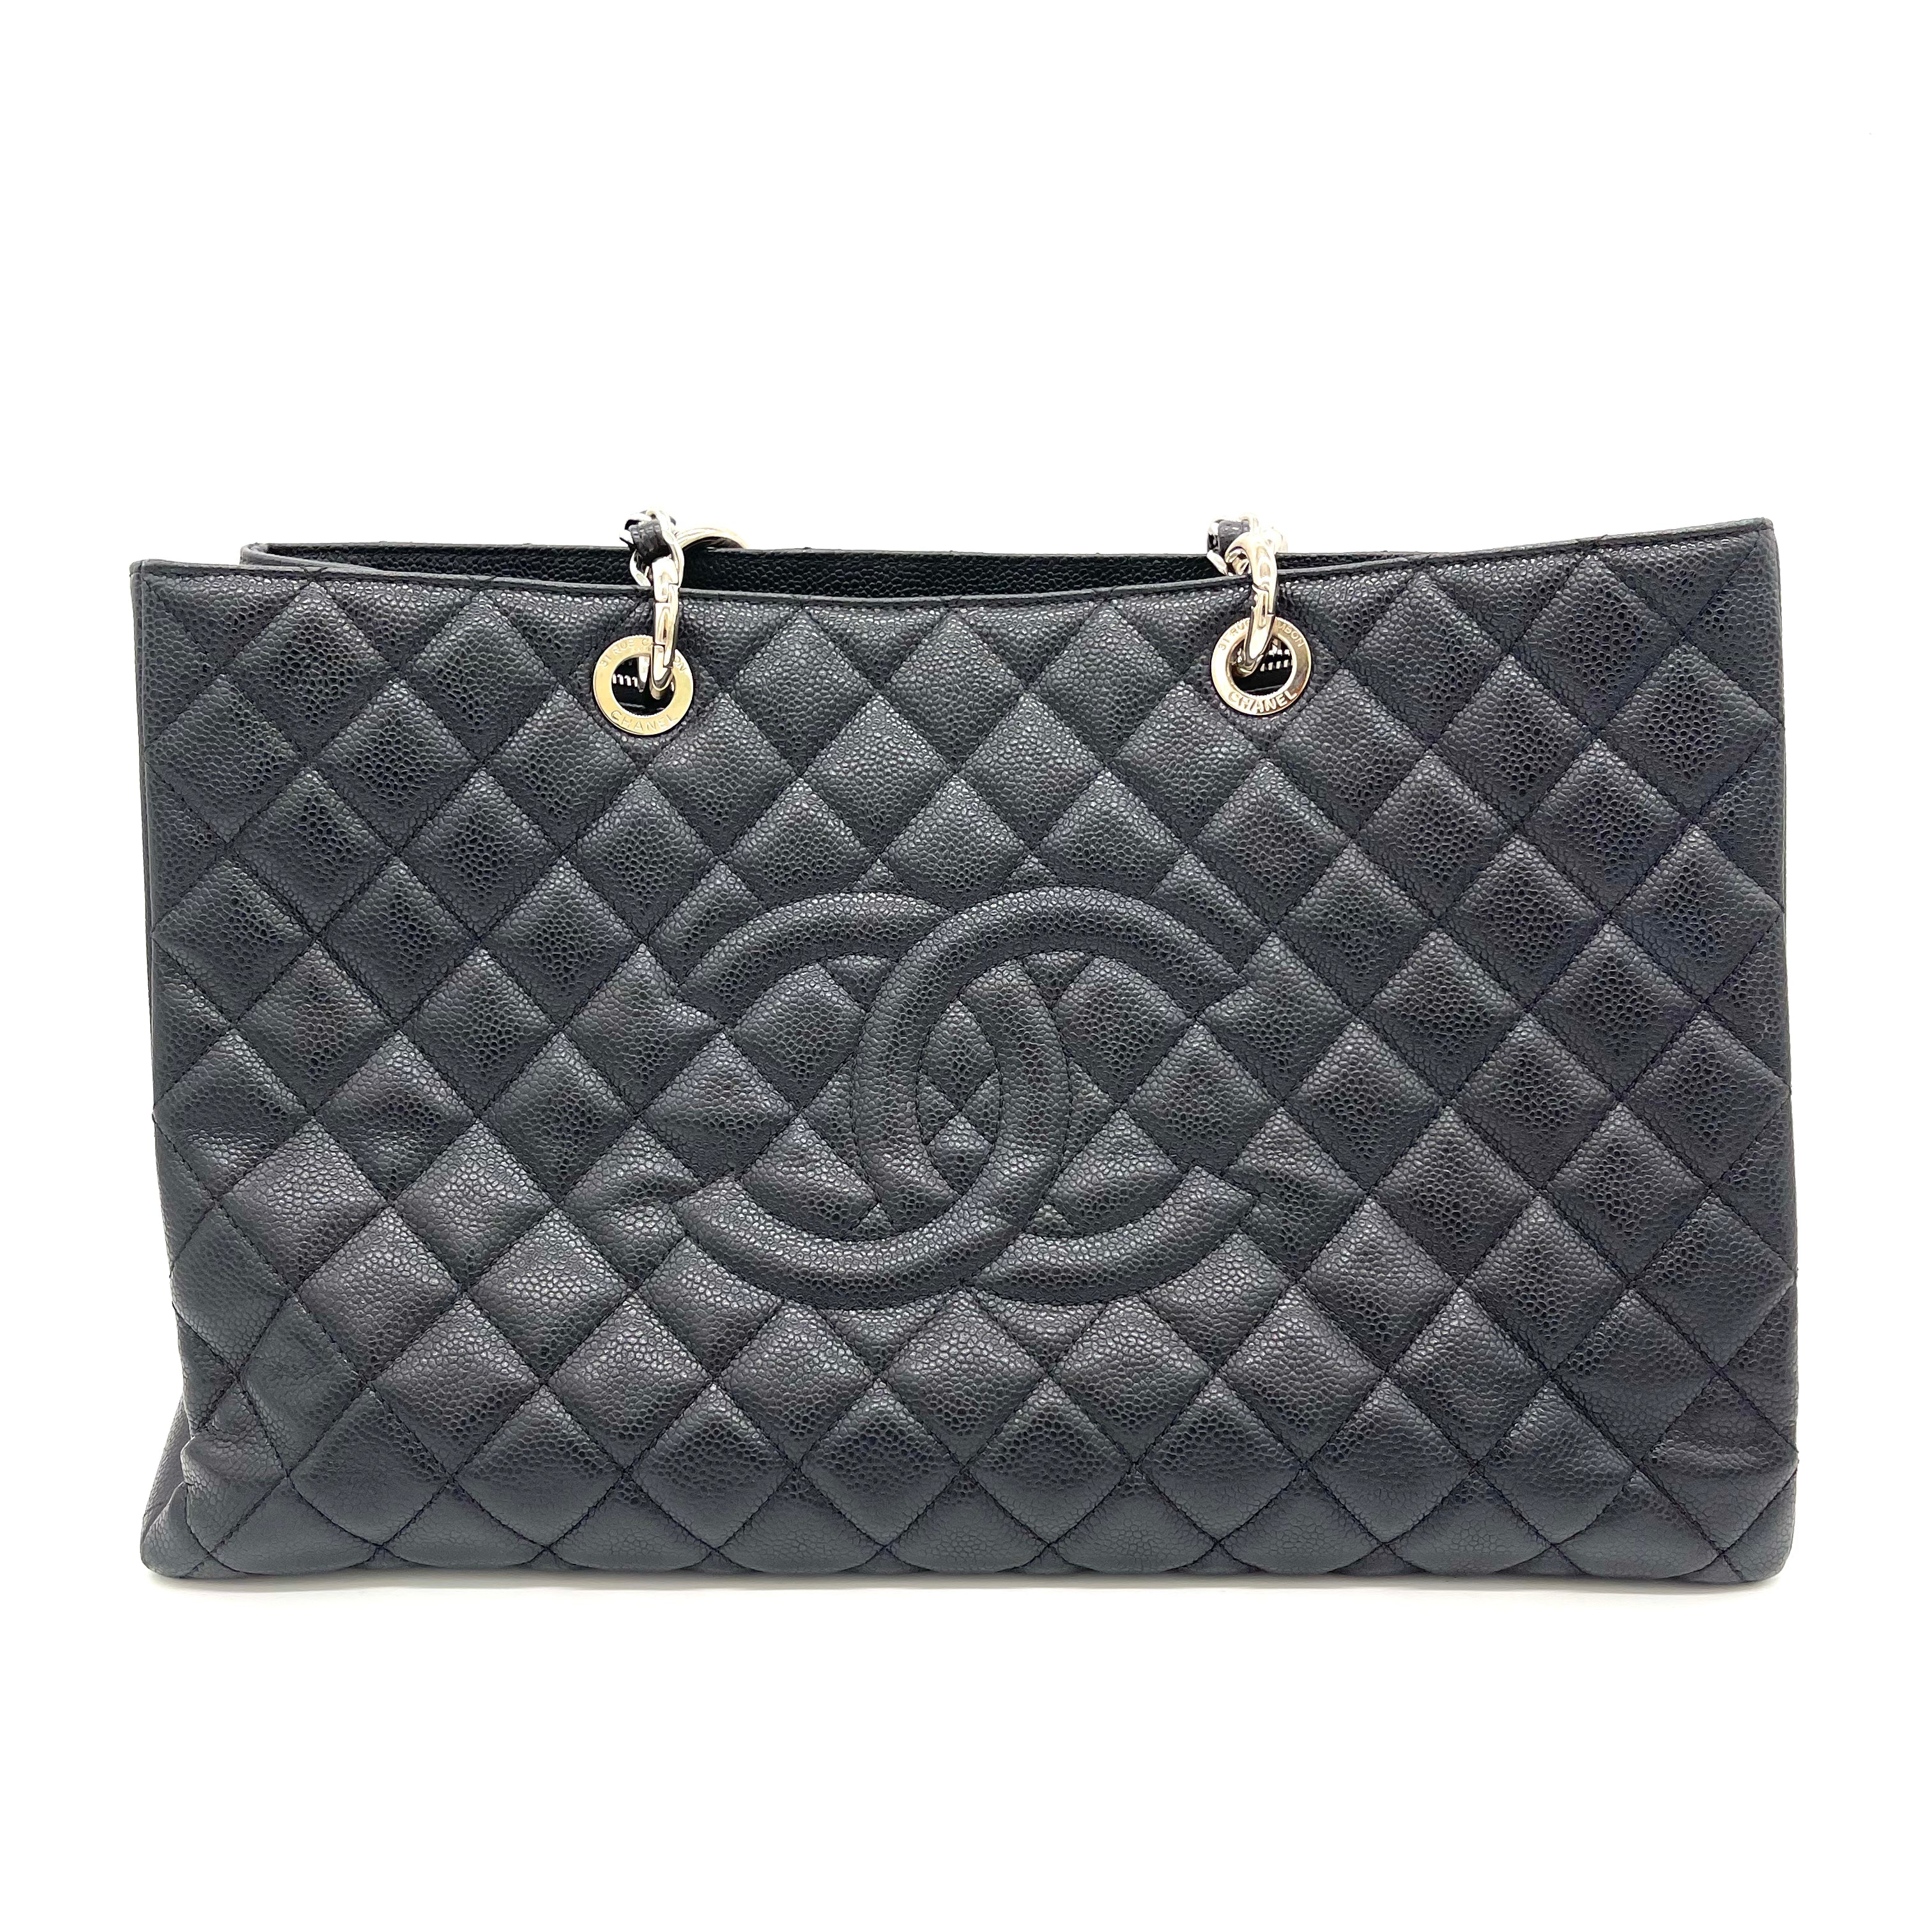 Authentic Chanel GST caviar neutral with gold hardware